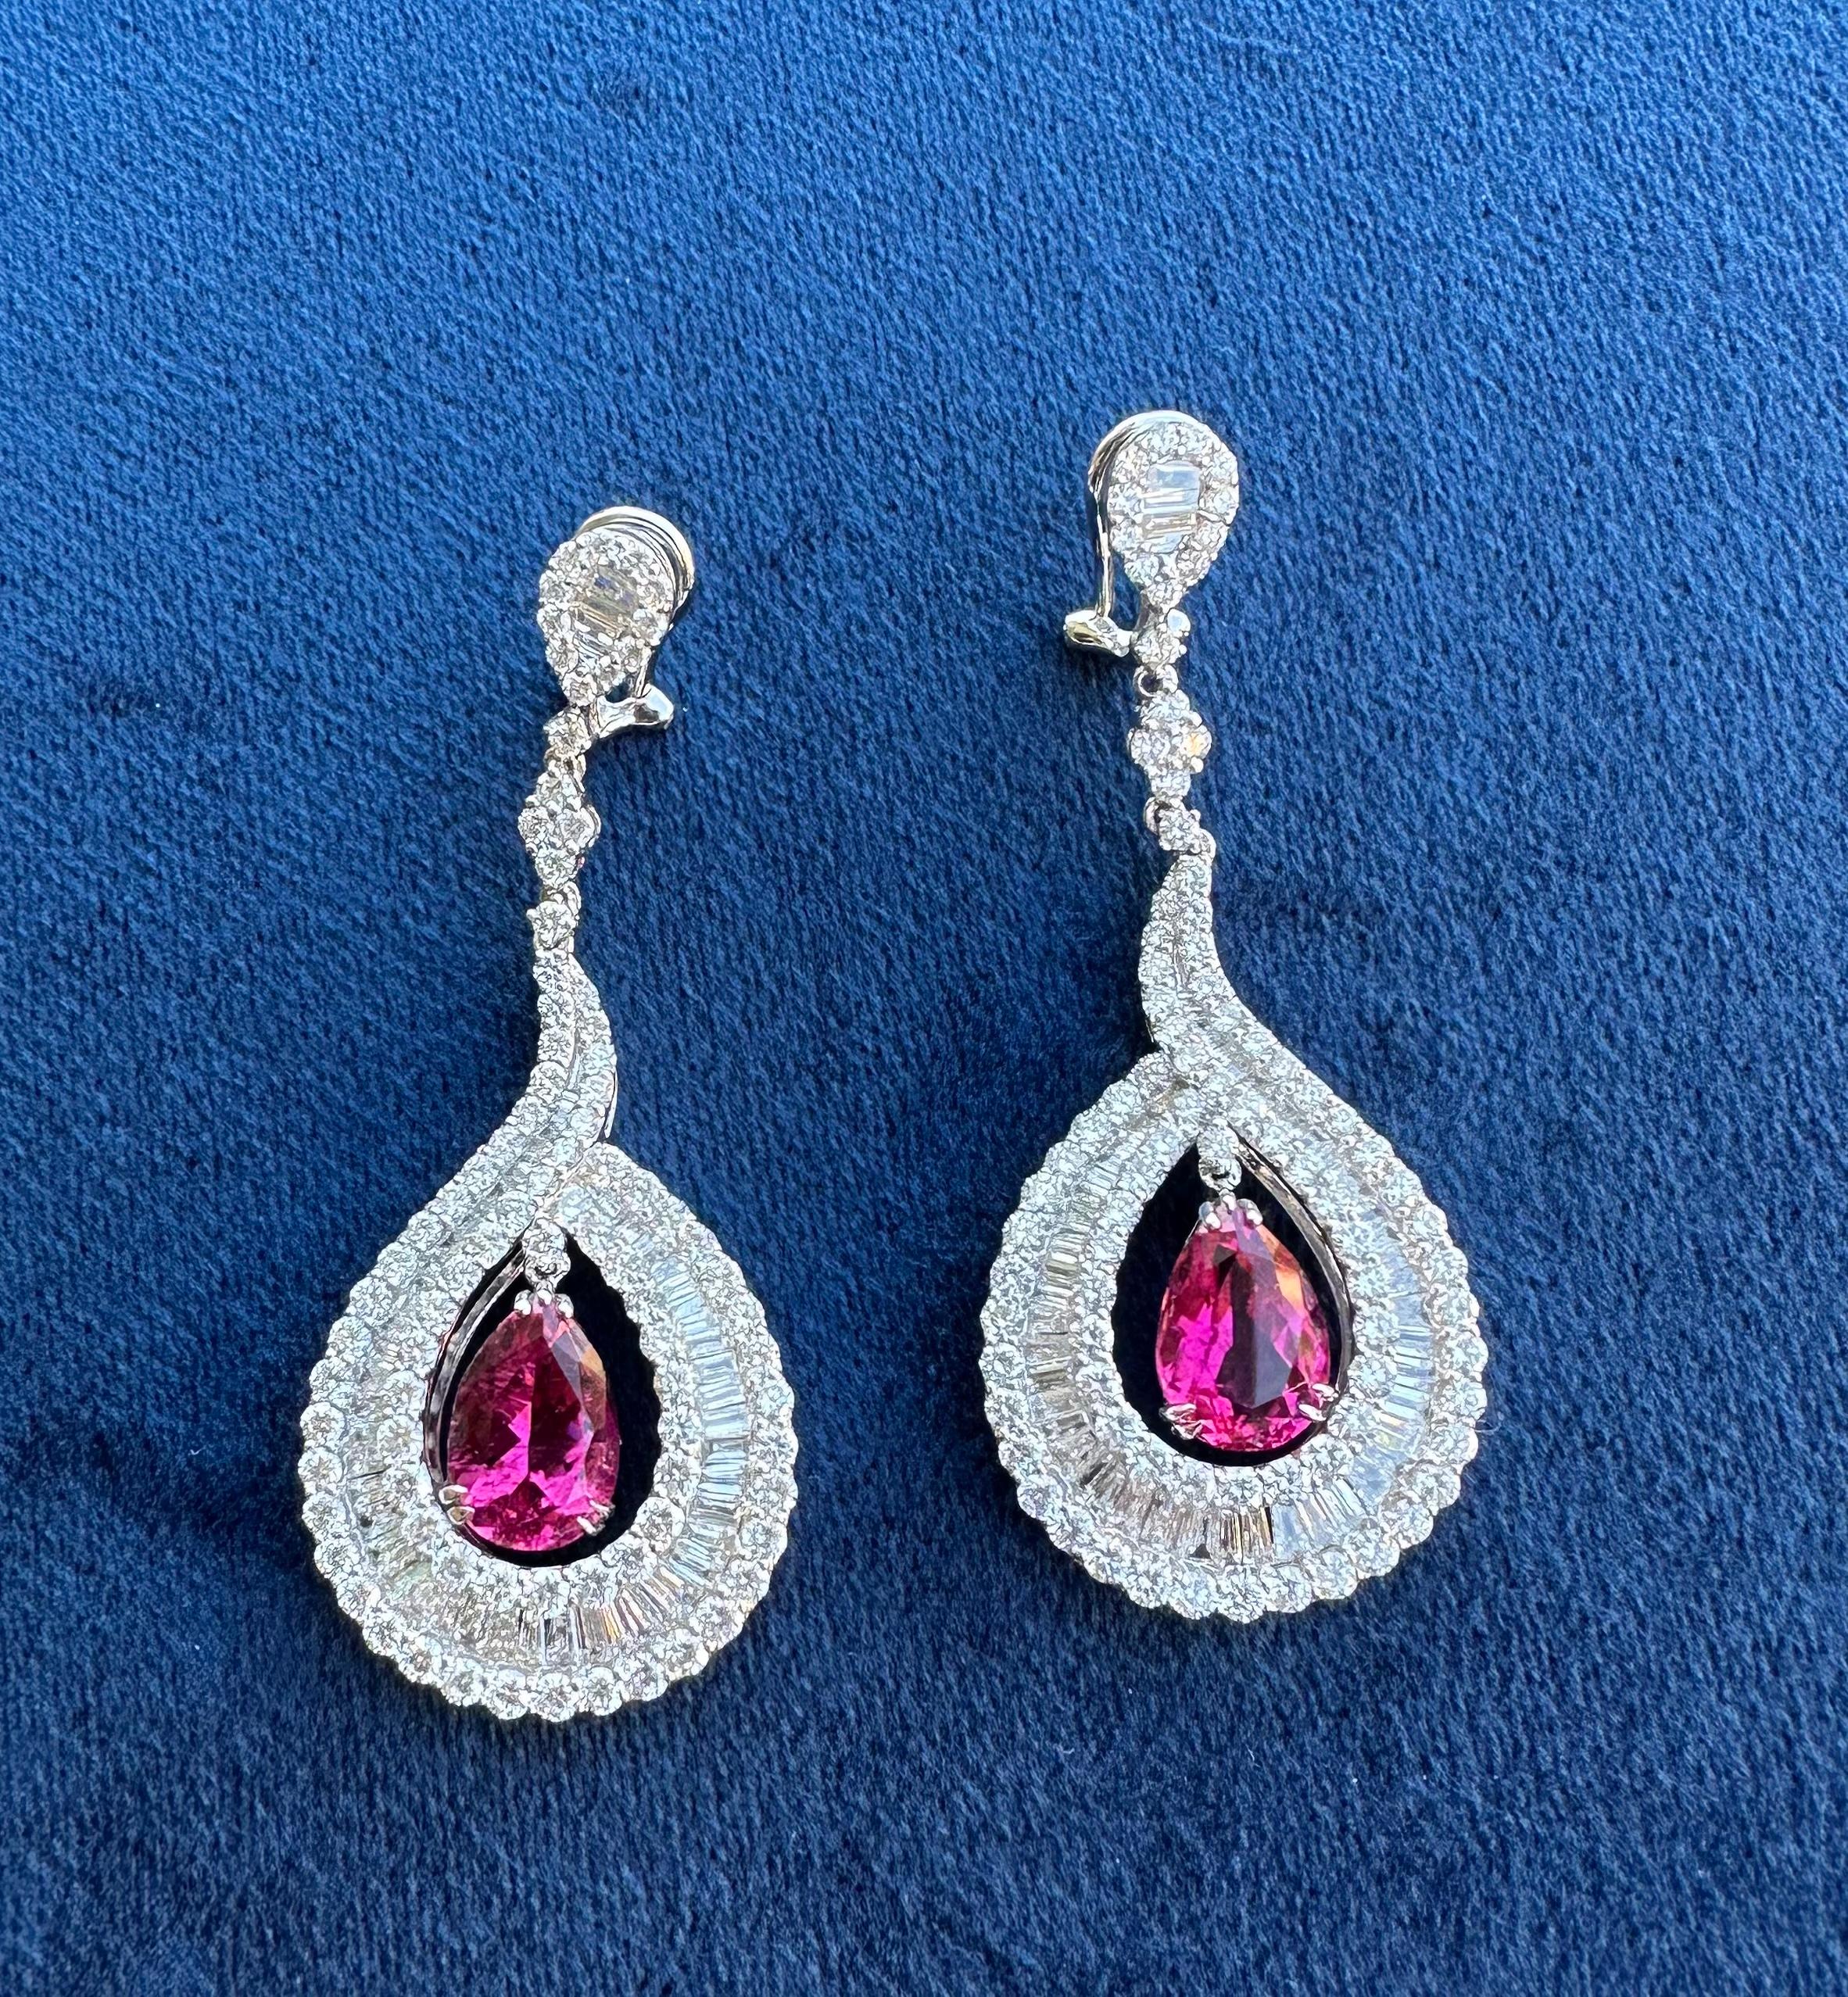 Magnificent, very dazzling in real life, pair of 18 karat white gold vivid pinkish red natural no heat Brazilian rubellite and diamond tear drop or pear shaped earrings, have a combined total carat weight of approximately 18.08 carats. 

The